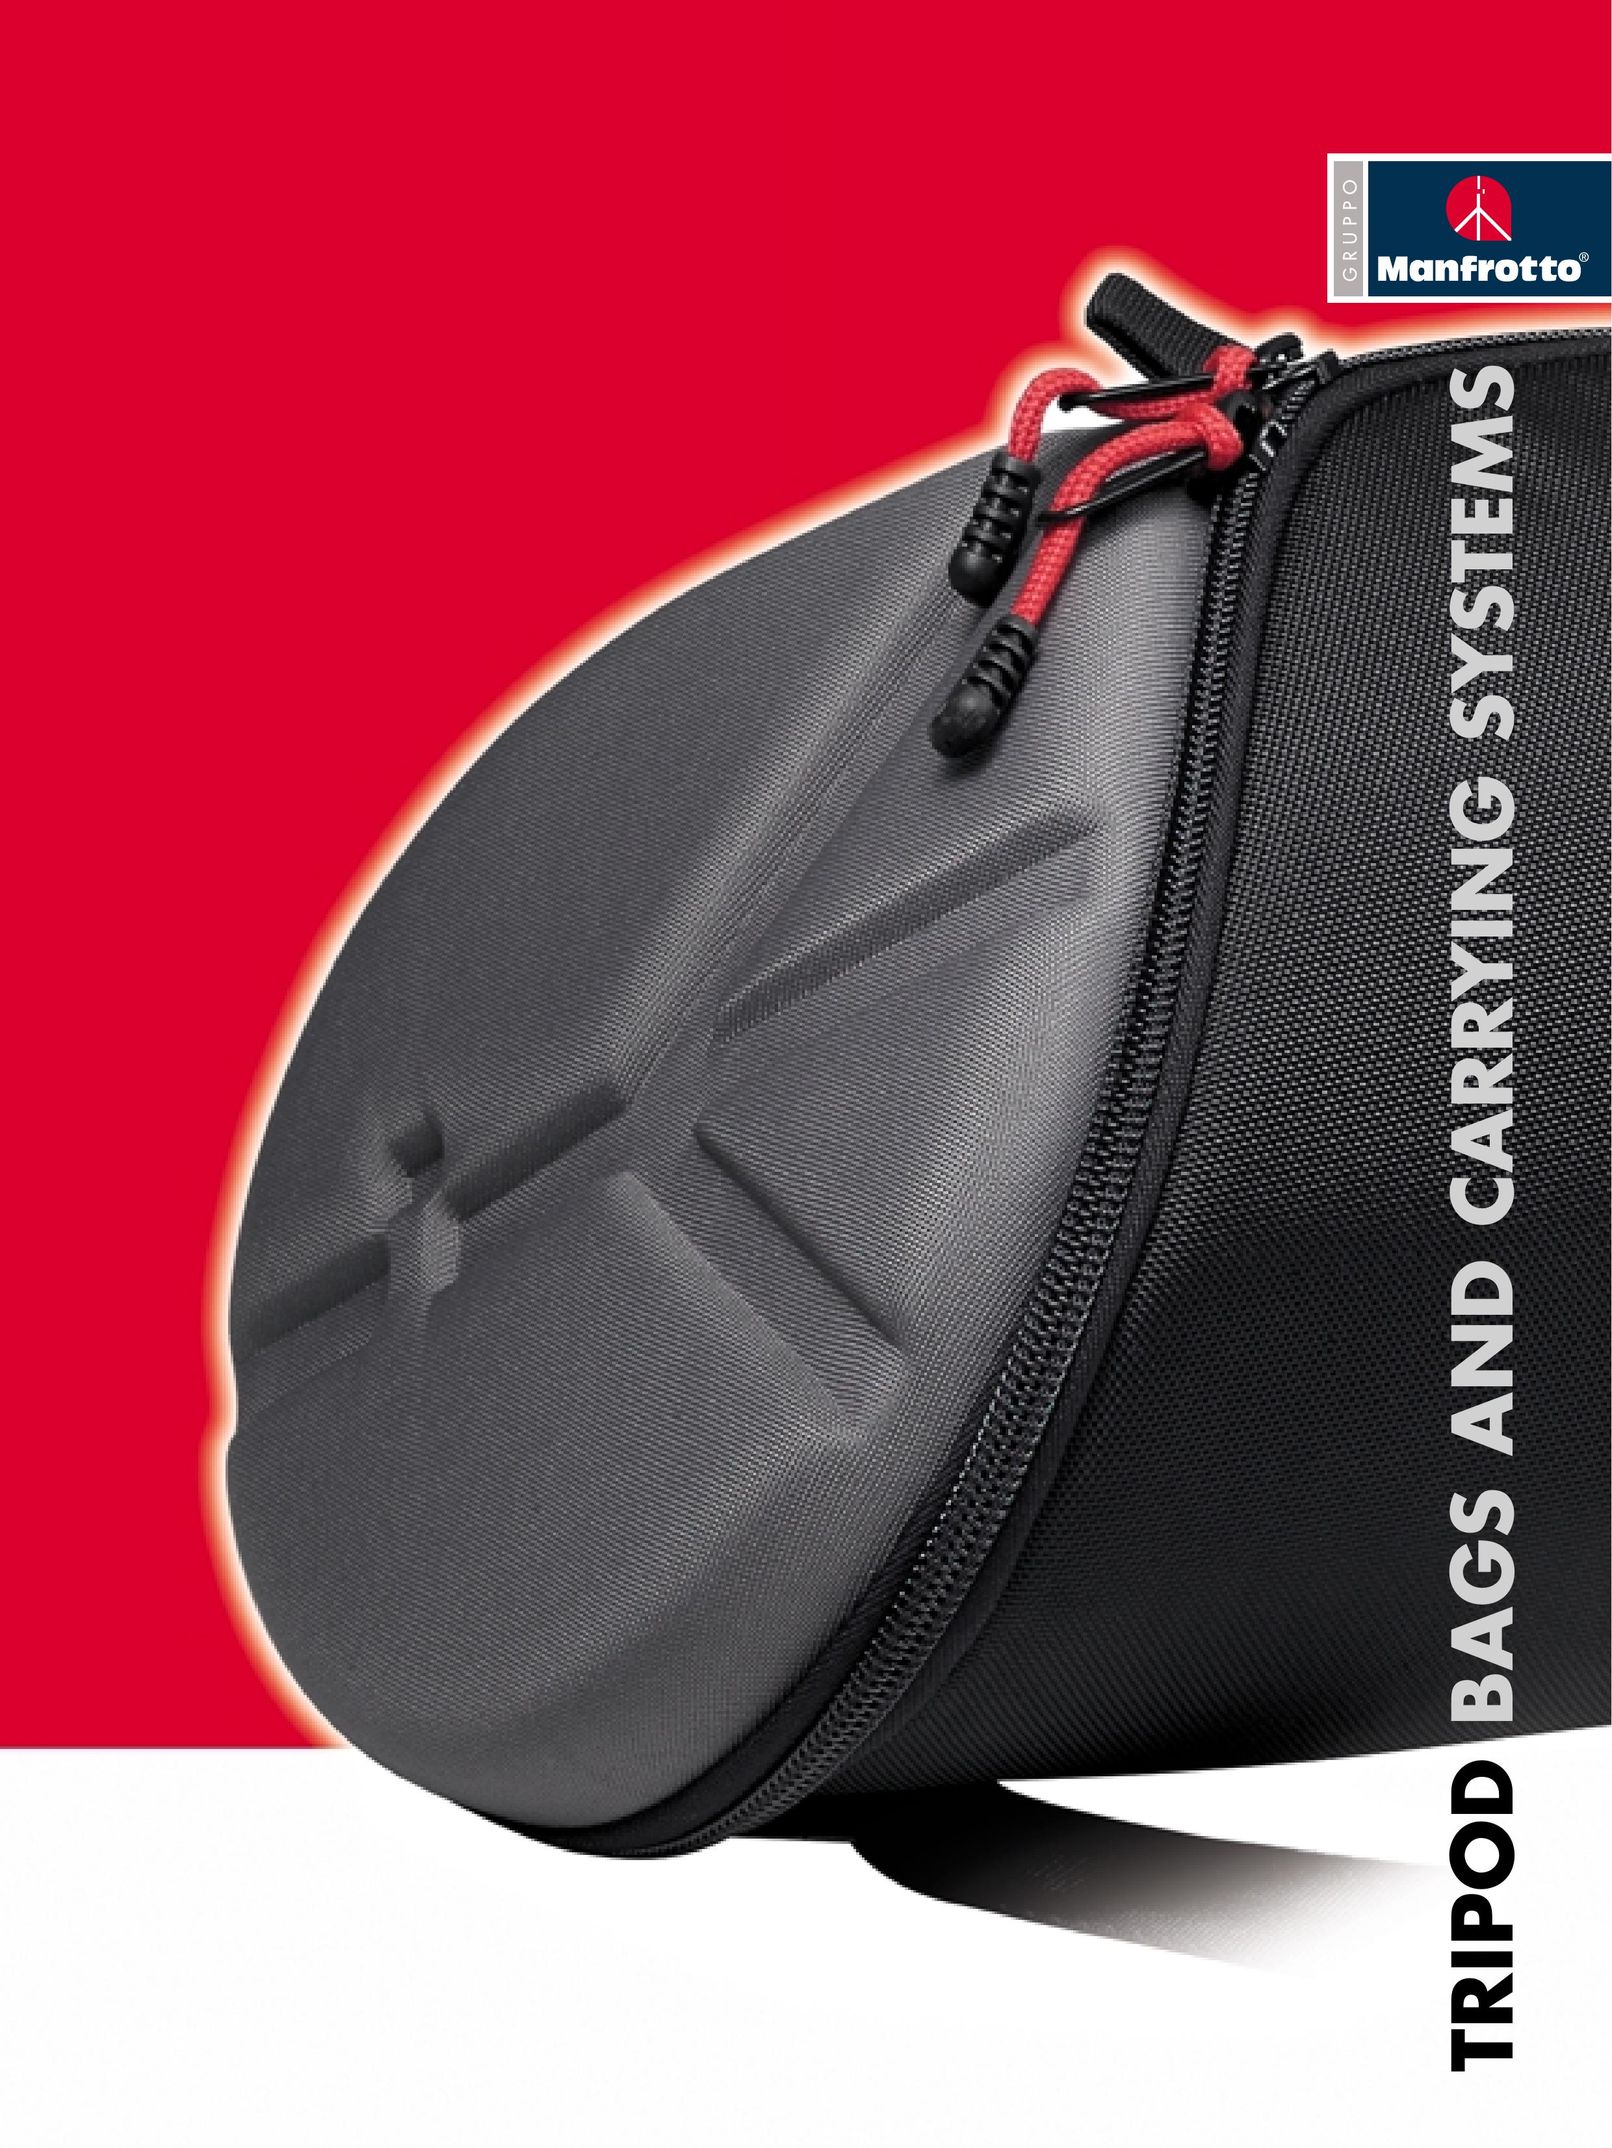 Manfrotto MBAG70 Carrying Case User Manual